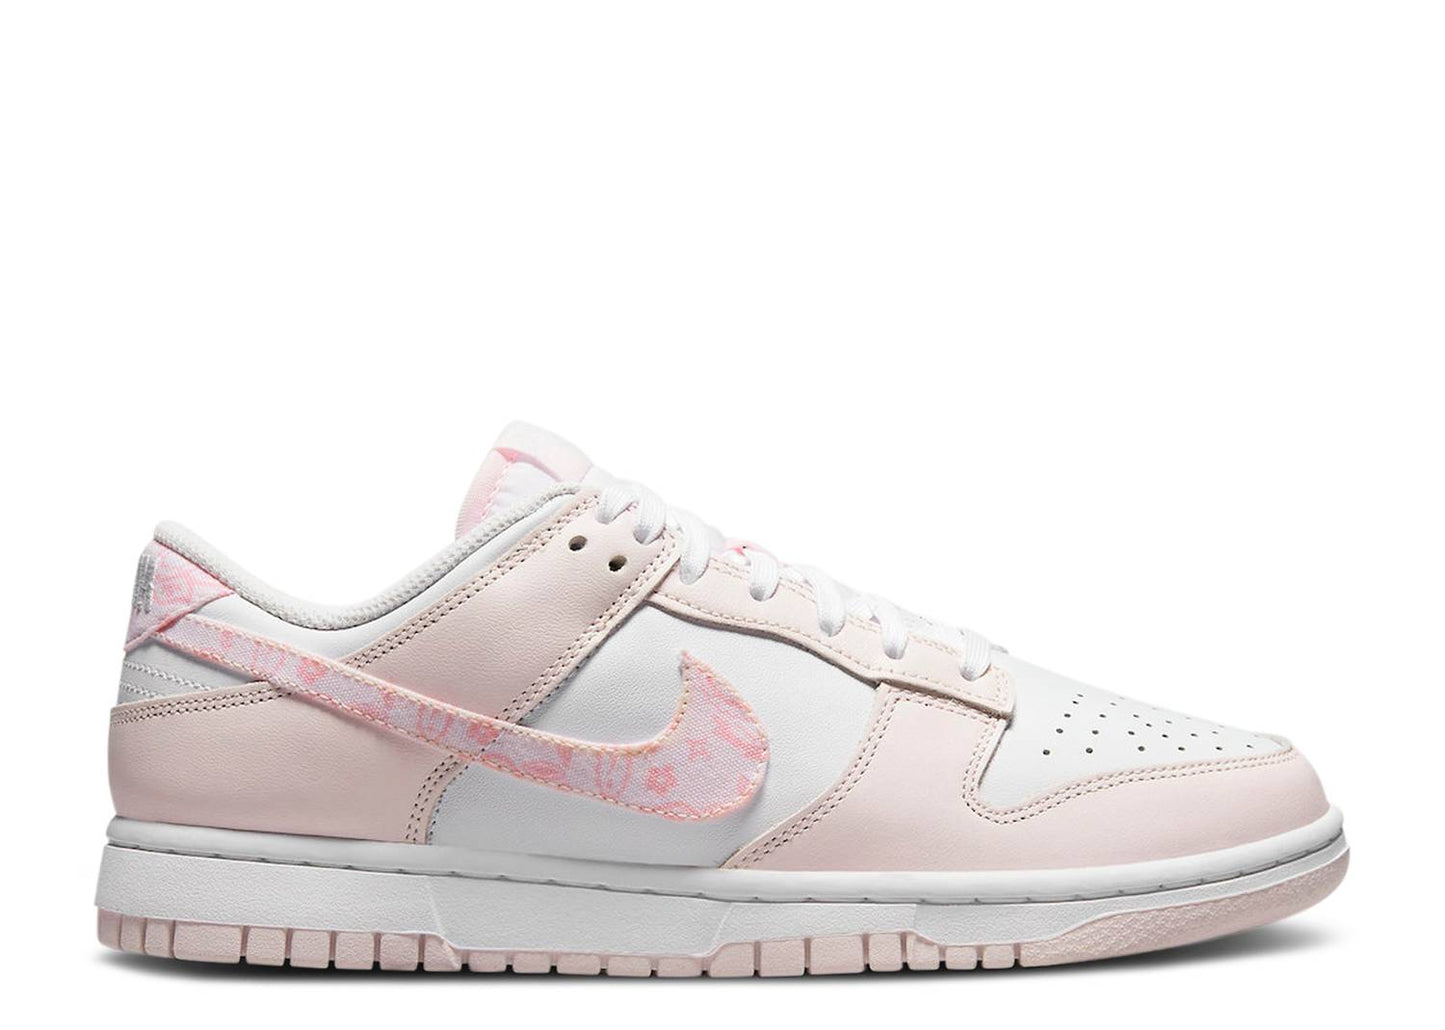 WMNS Dunk Low Paisley "Pink"